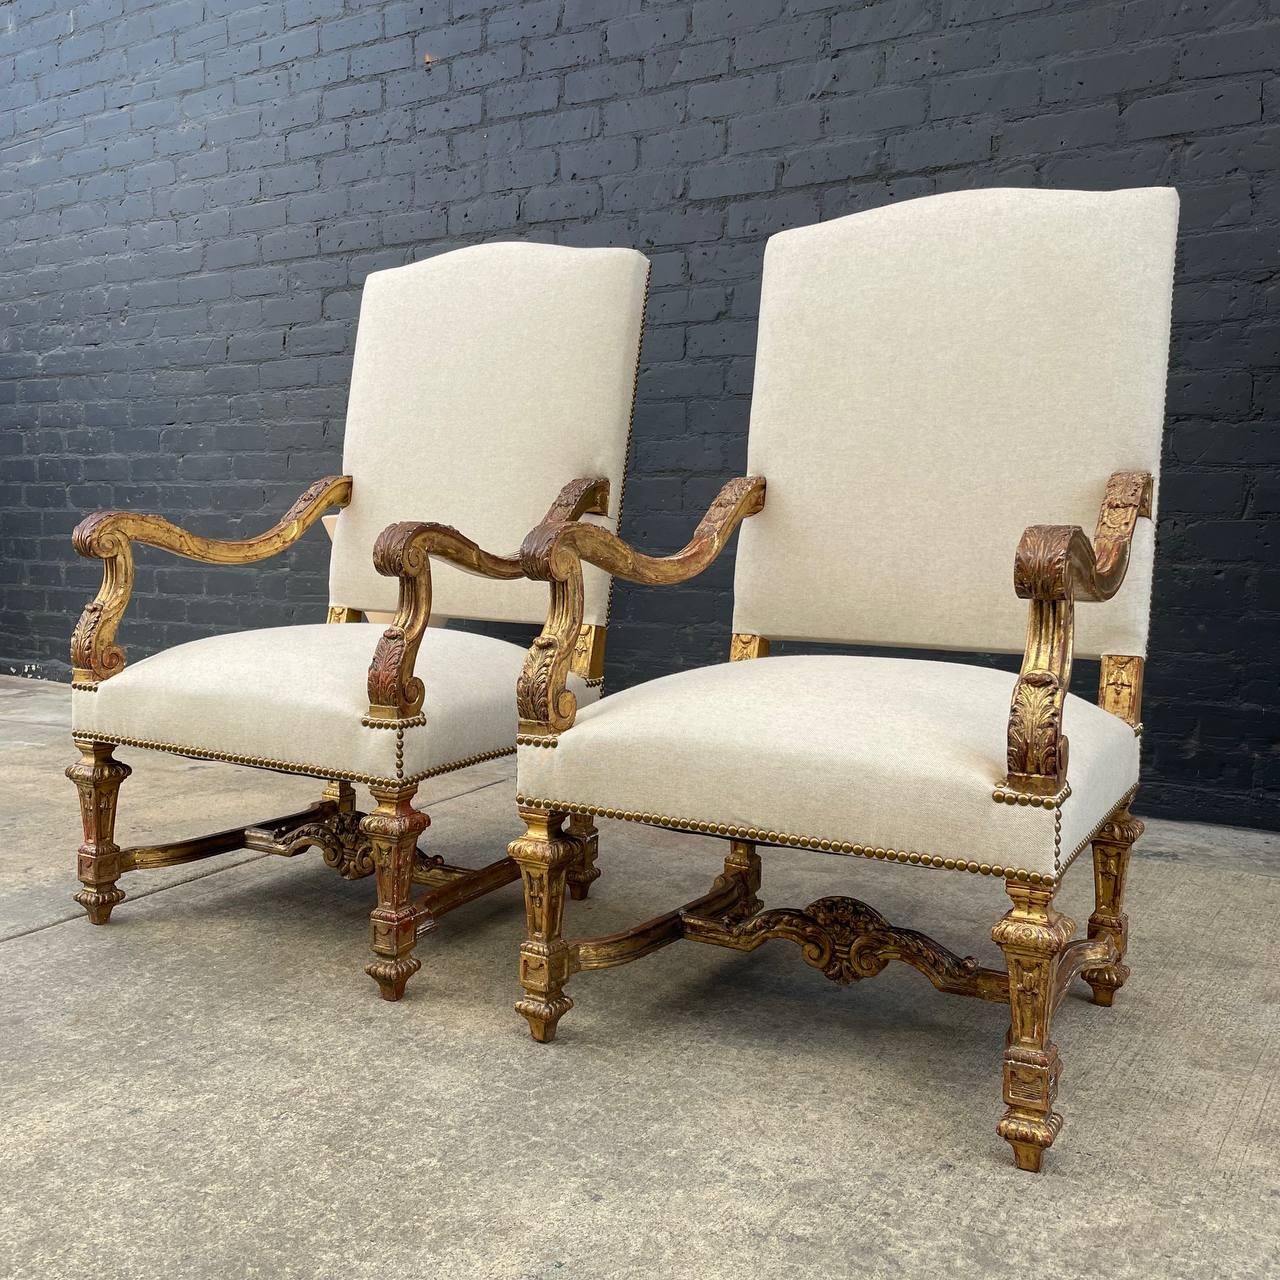 Luxurious, pair of early 20th century Italian carved giltwood armchairs in the Louis XIV style. These exquisitely carved chairs have been newly upholstered in a linen fabric which is soft to the touch and rich in texture. Antiqued brass nailhead